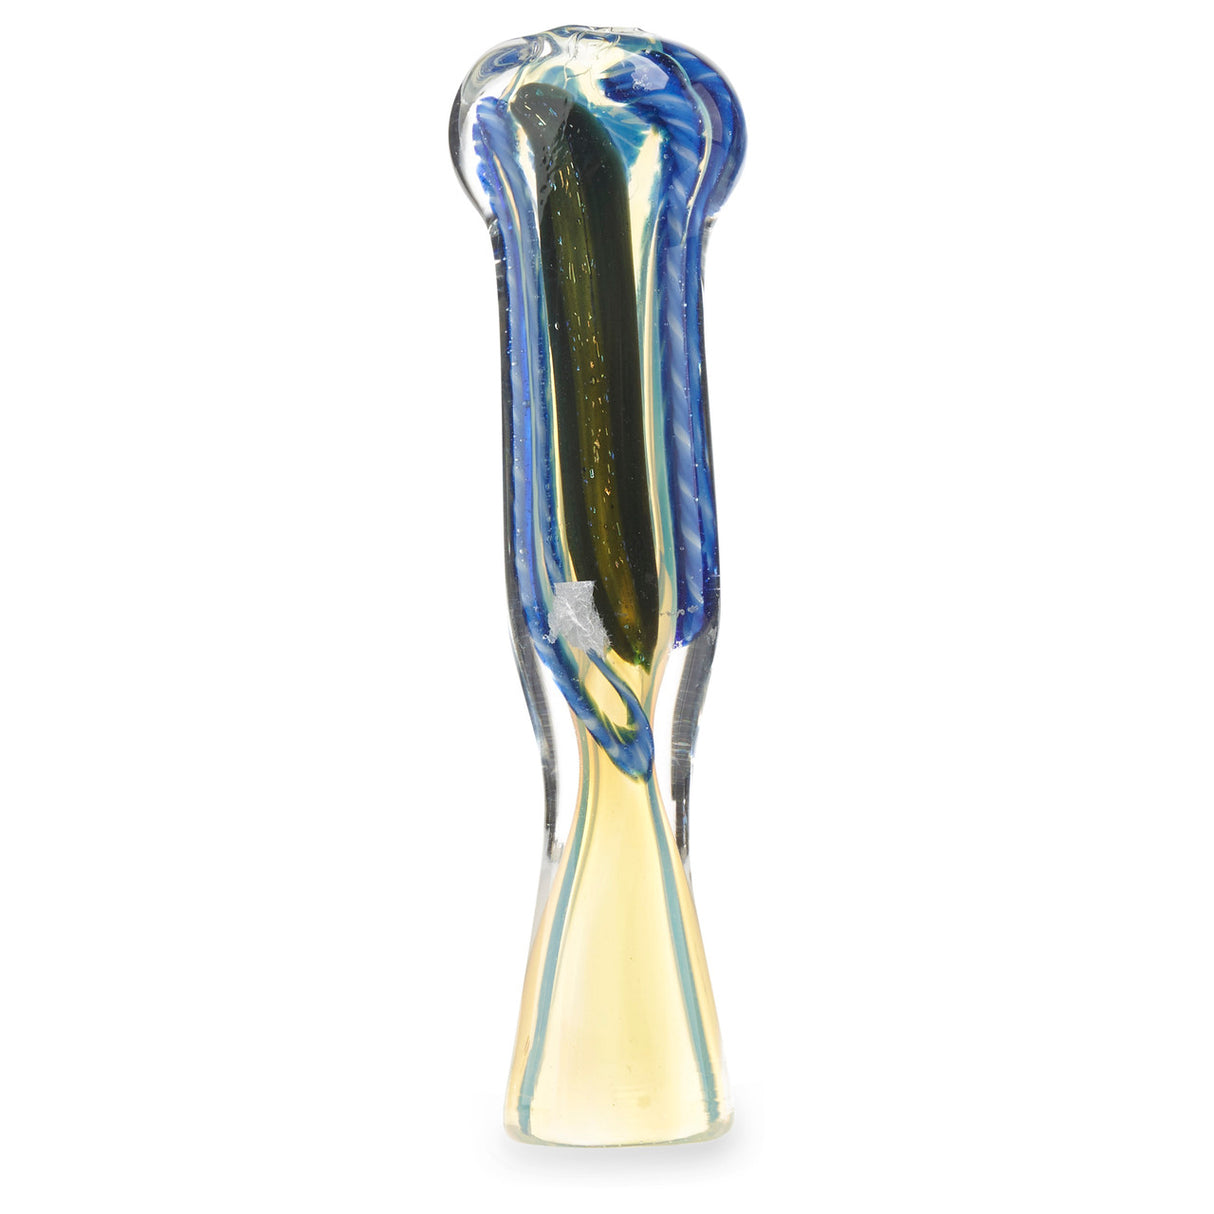 dope glass chillum with art design for sale online